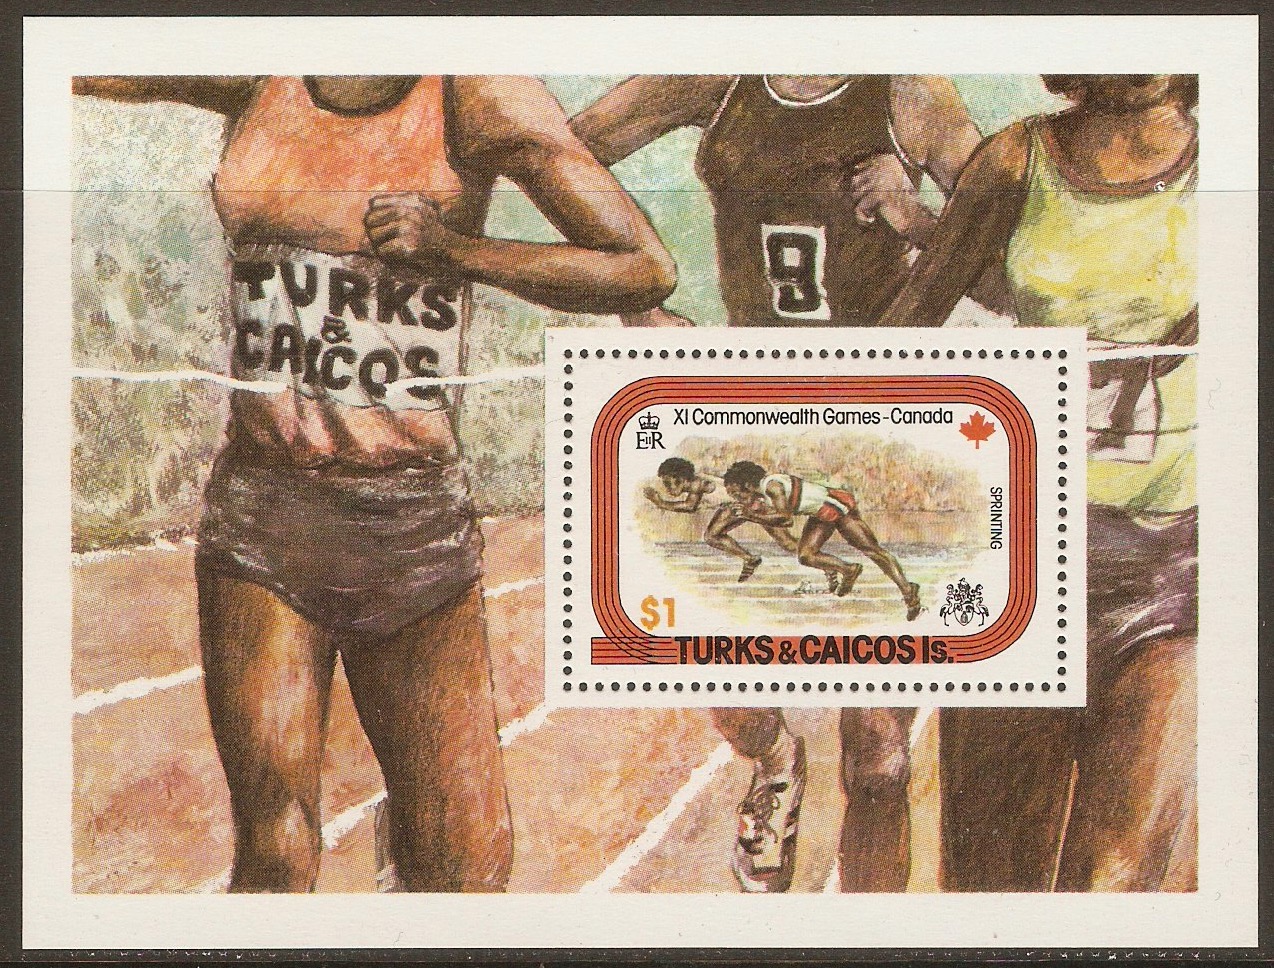 Turks and Caicos 1978 $1 Commonwealth Games sheet. SGMS513.